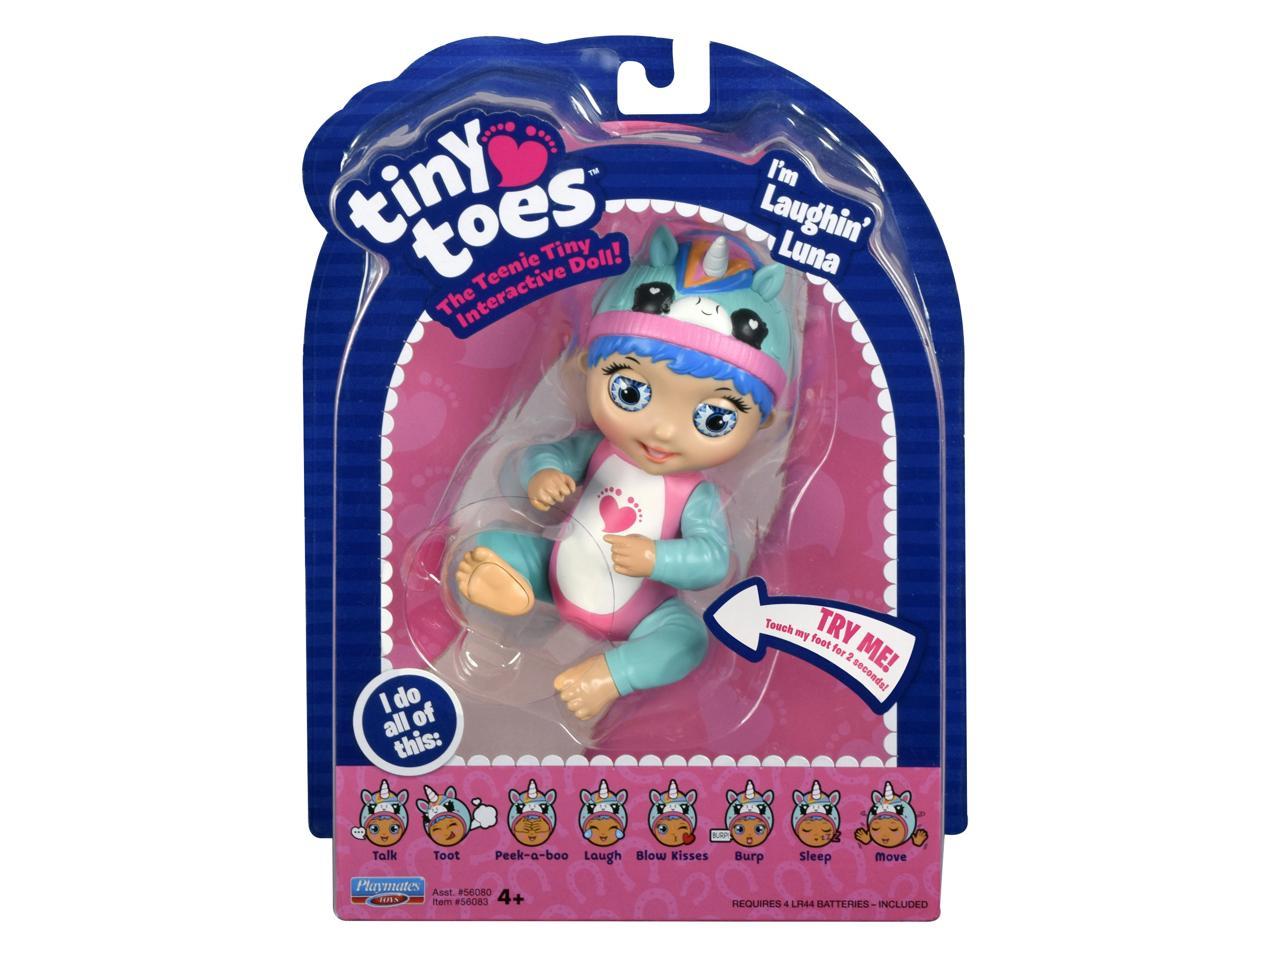 Tiny Toes are Teenie Playmates Tiny Toes Giggling Gabby Tiny Dolls That Comes to Life in The Palm of Your Hand! Panda 